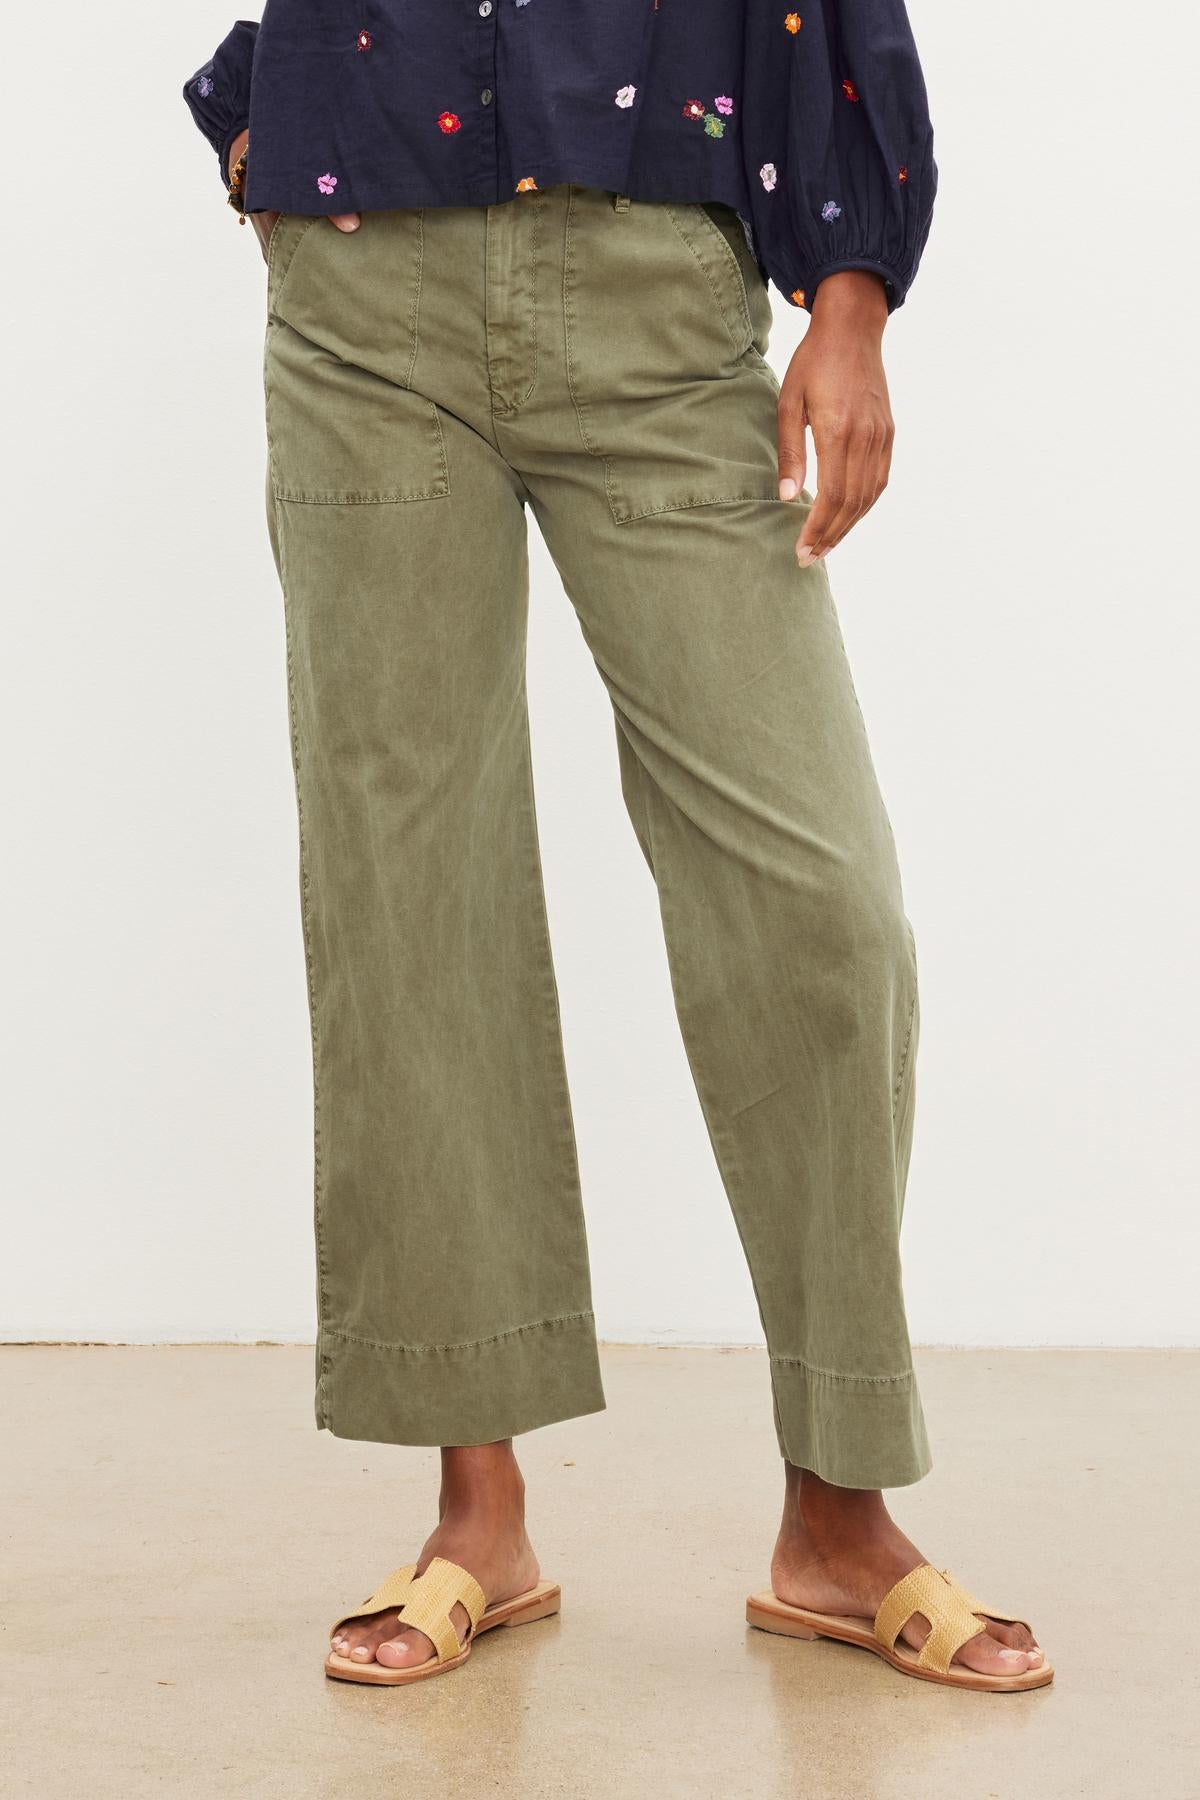 Person standing in Velvet by Graham & Spencer's MYA COTTON CANVAS PANT and sandals, with a focus on the lower half of their body against a neutral background.-36425663480001